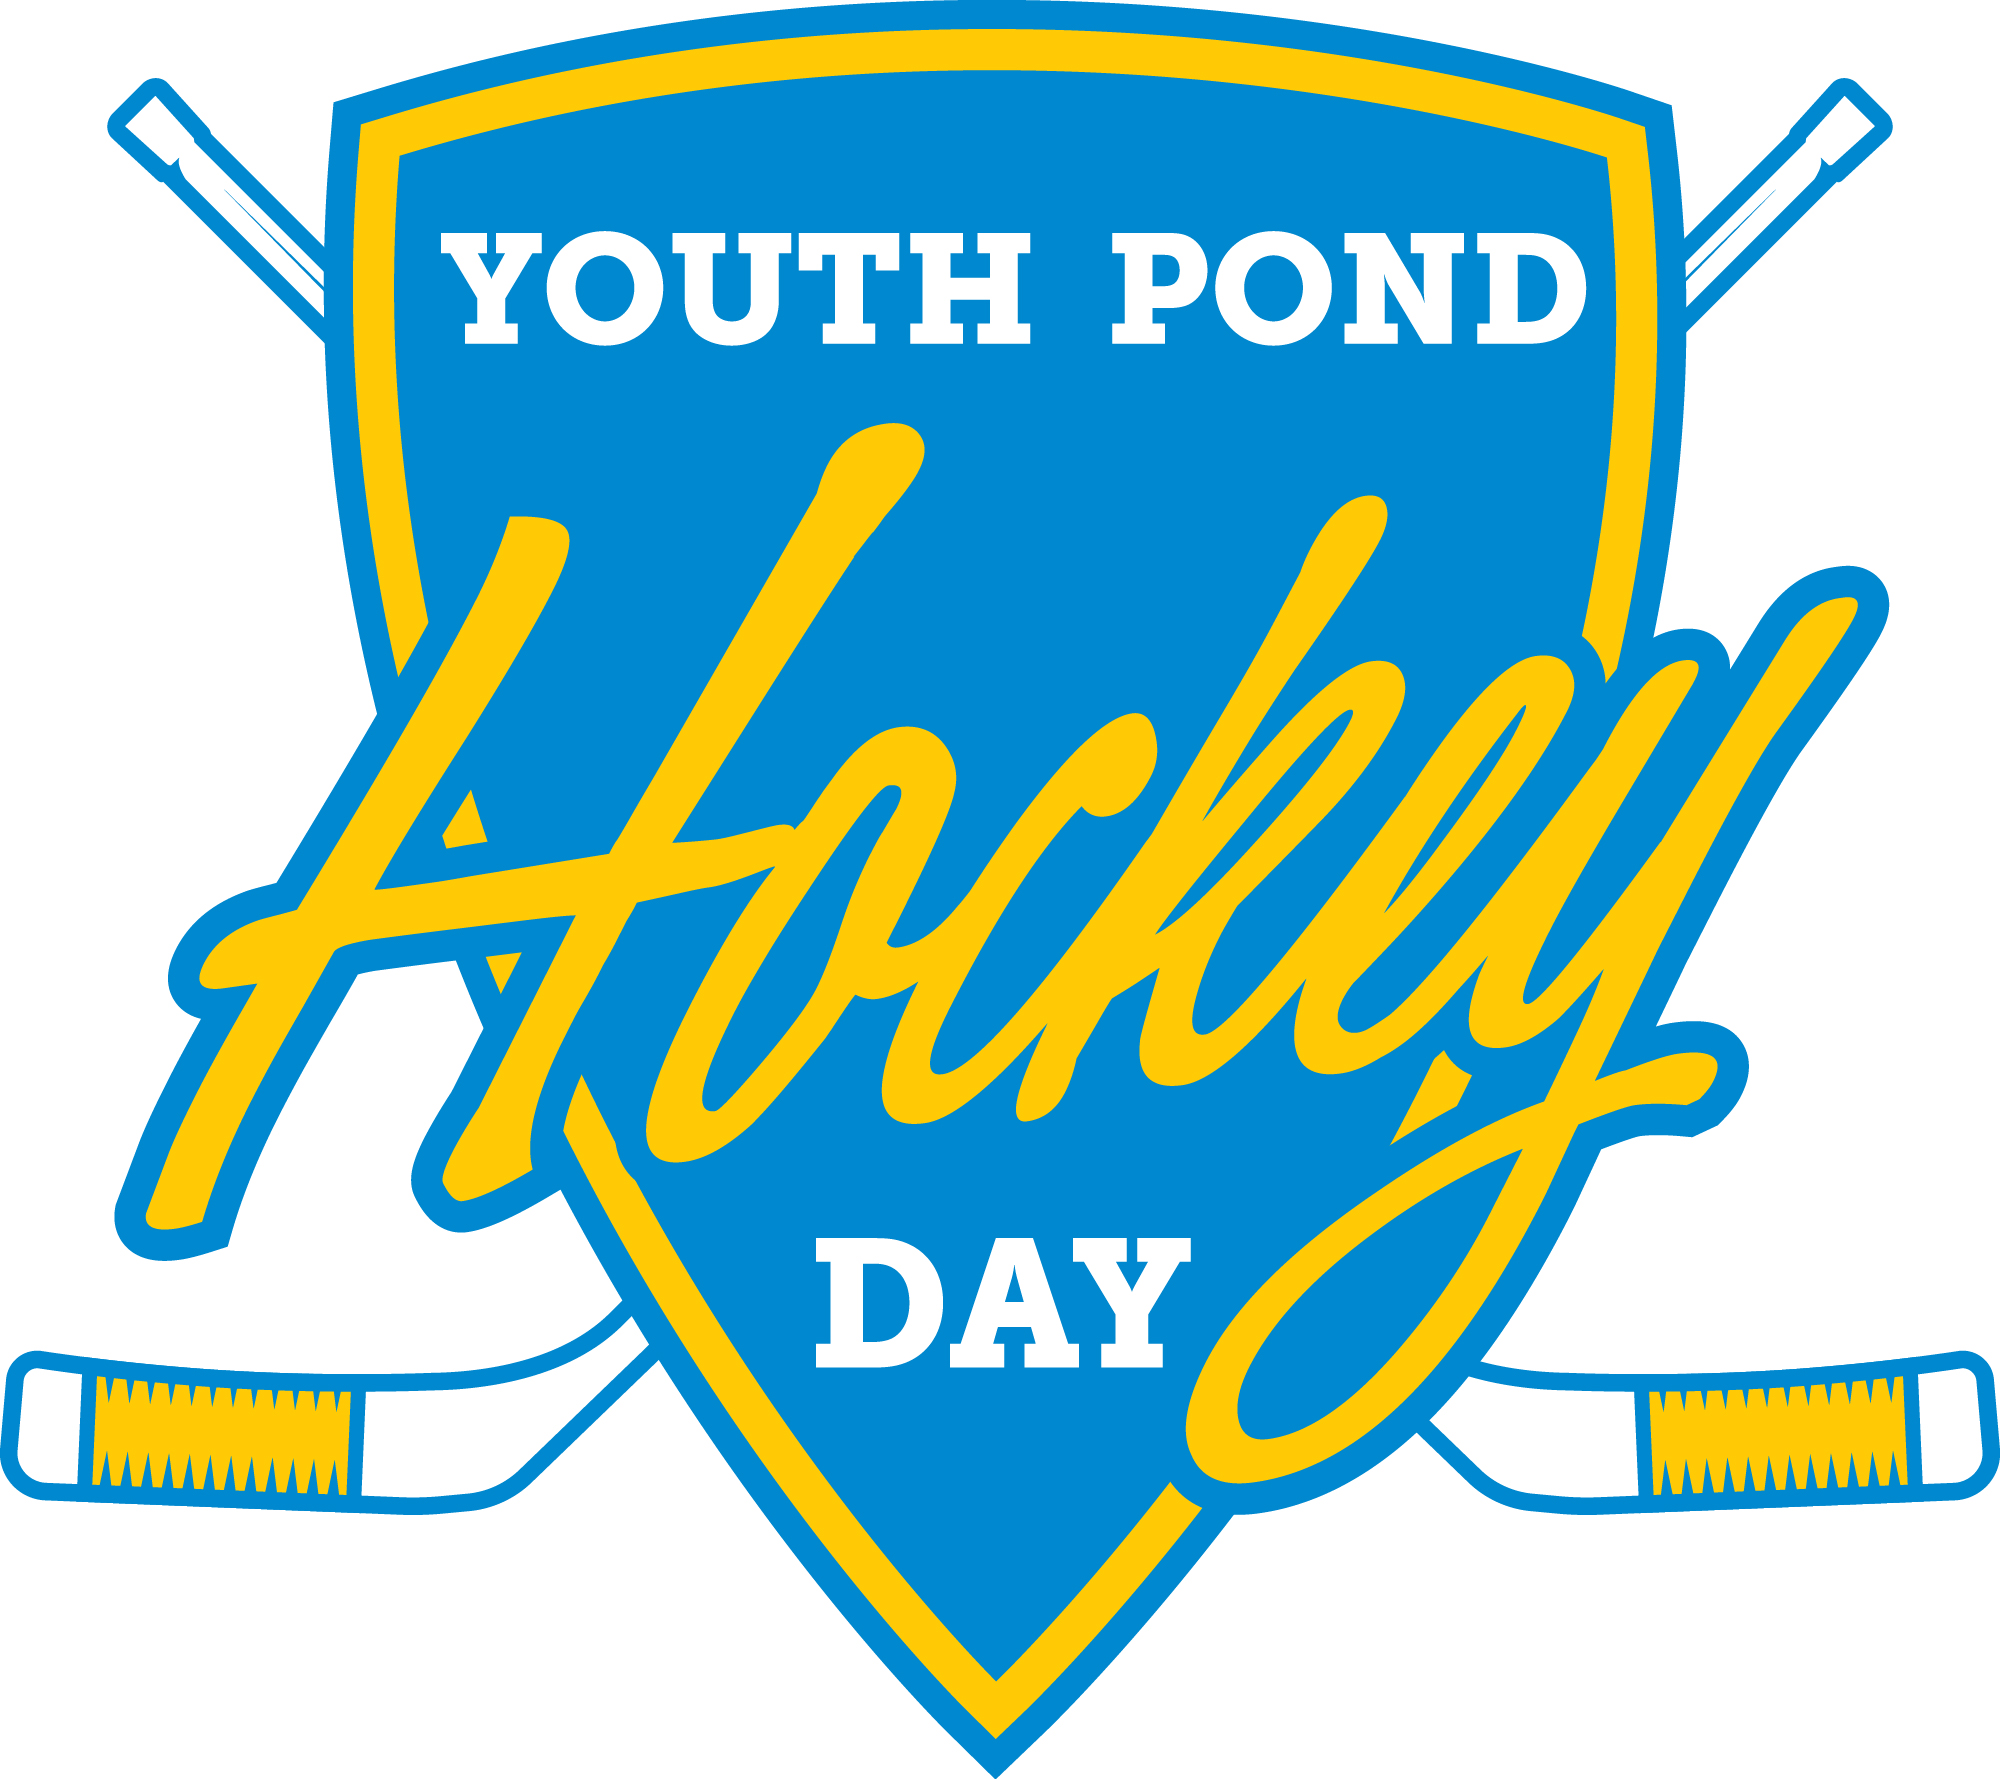 This image shows the Youth Pond Hockey Day logo.